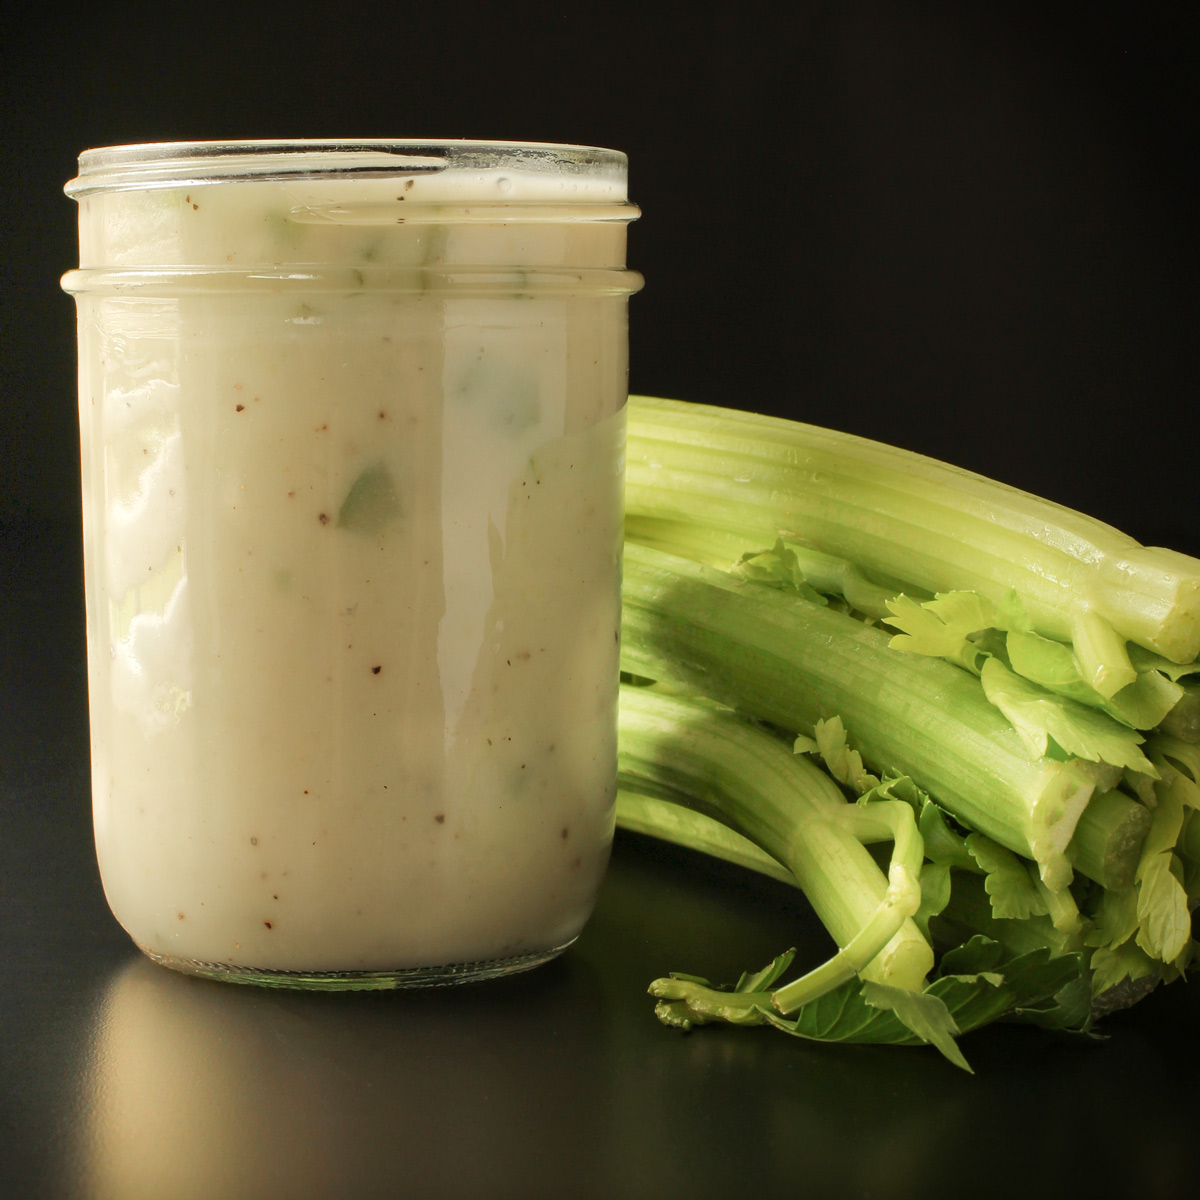 jar of cream of celery soup on black table with ribs of celery nearby.